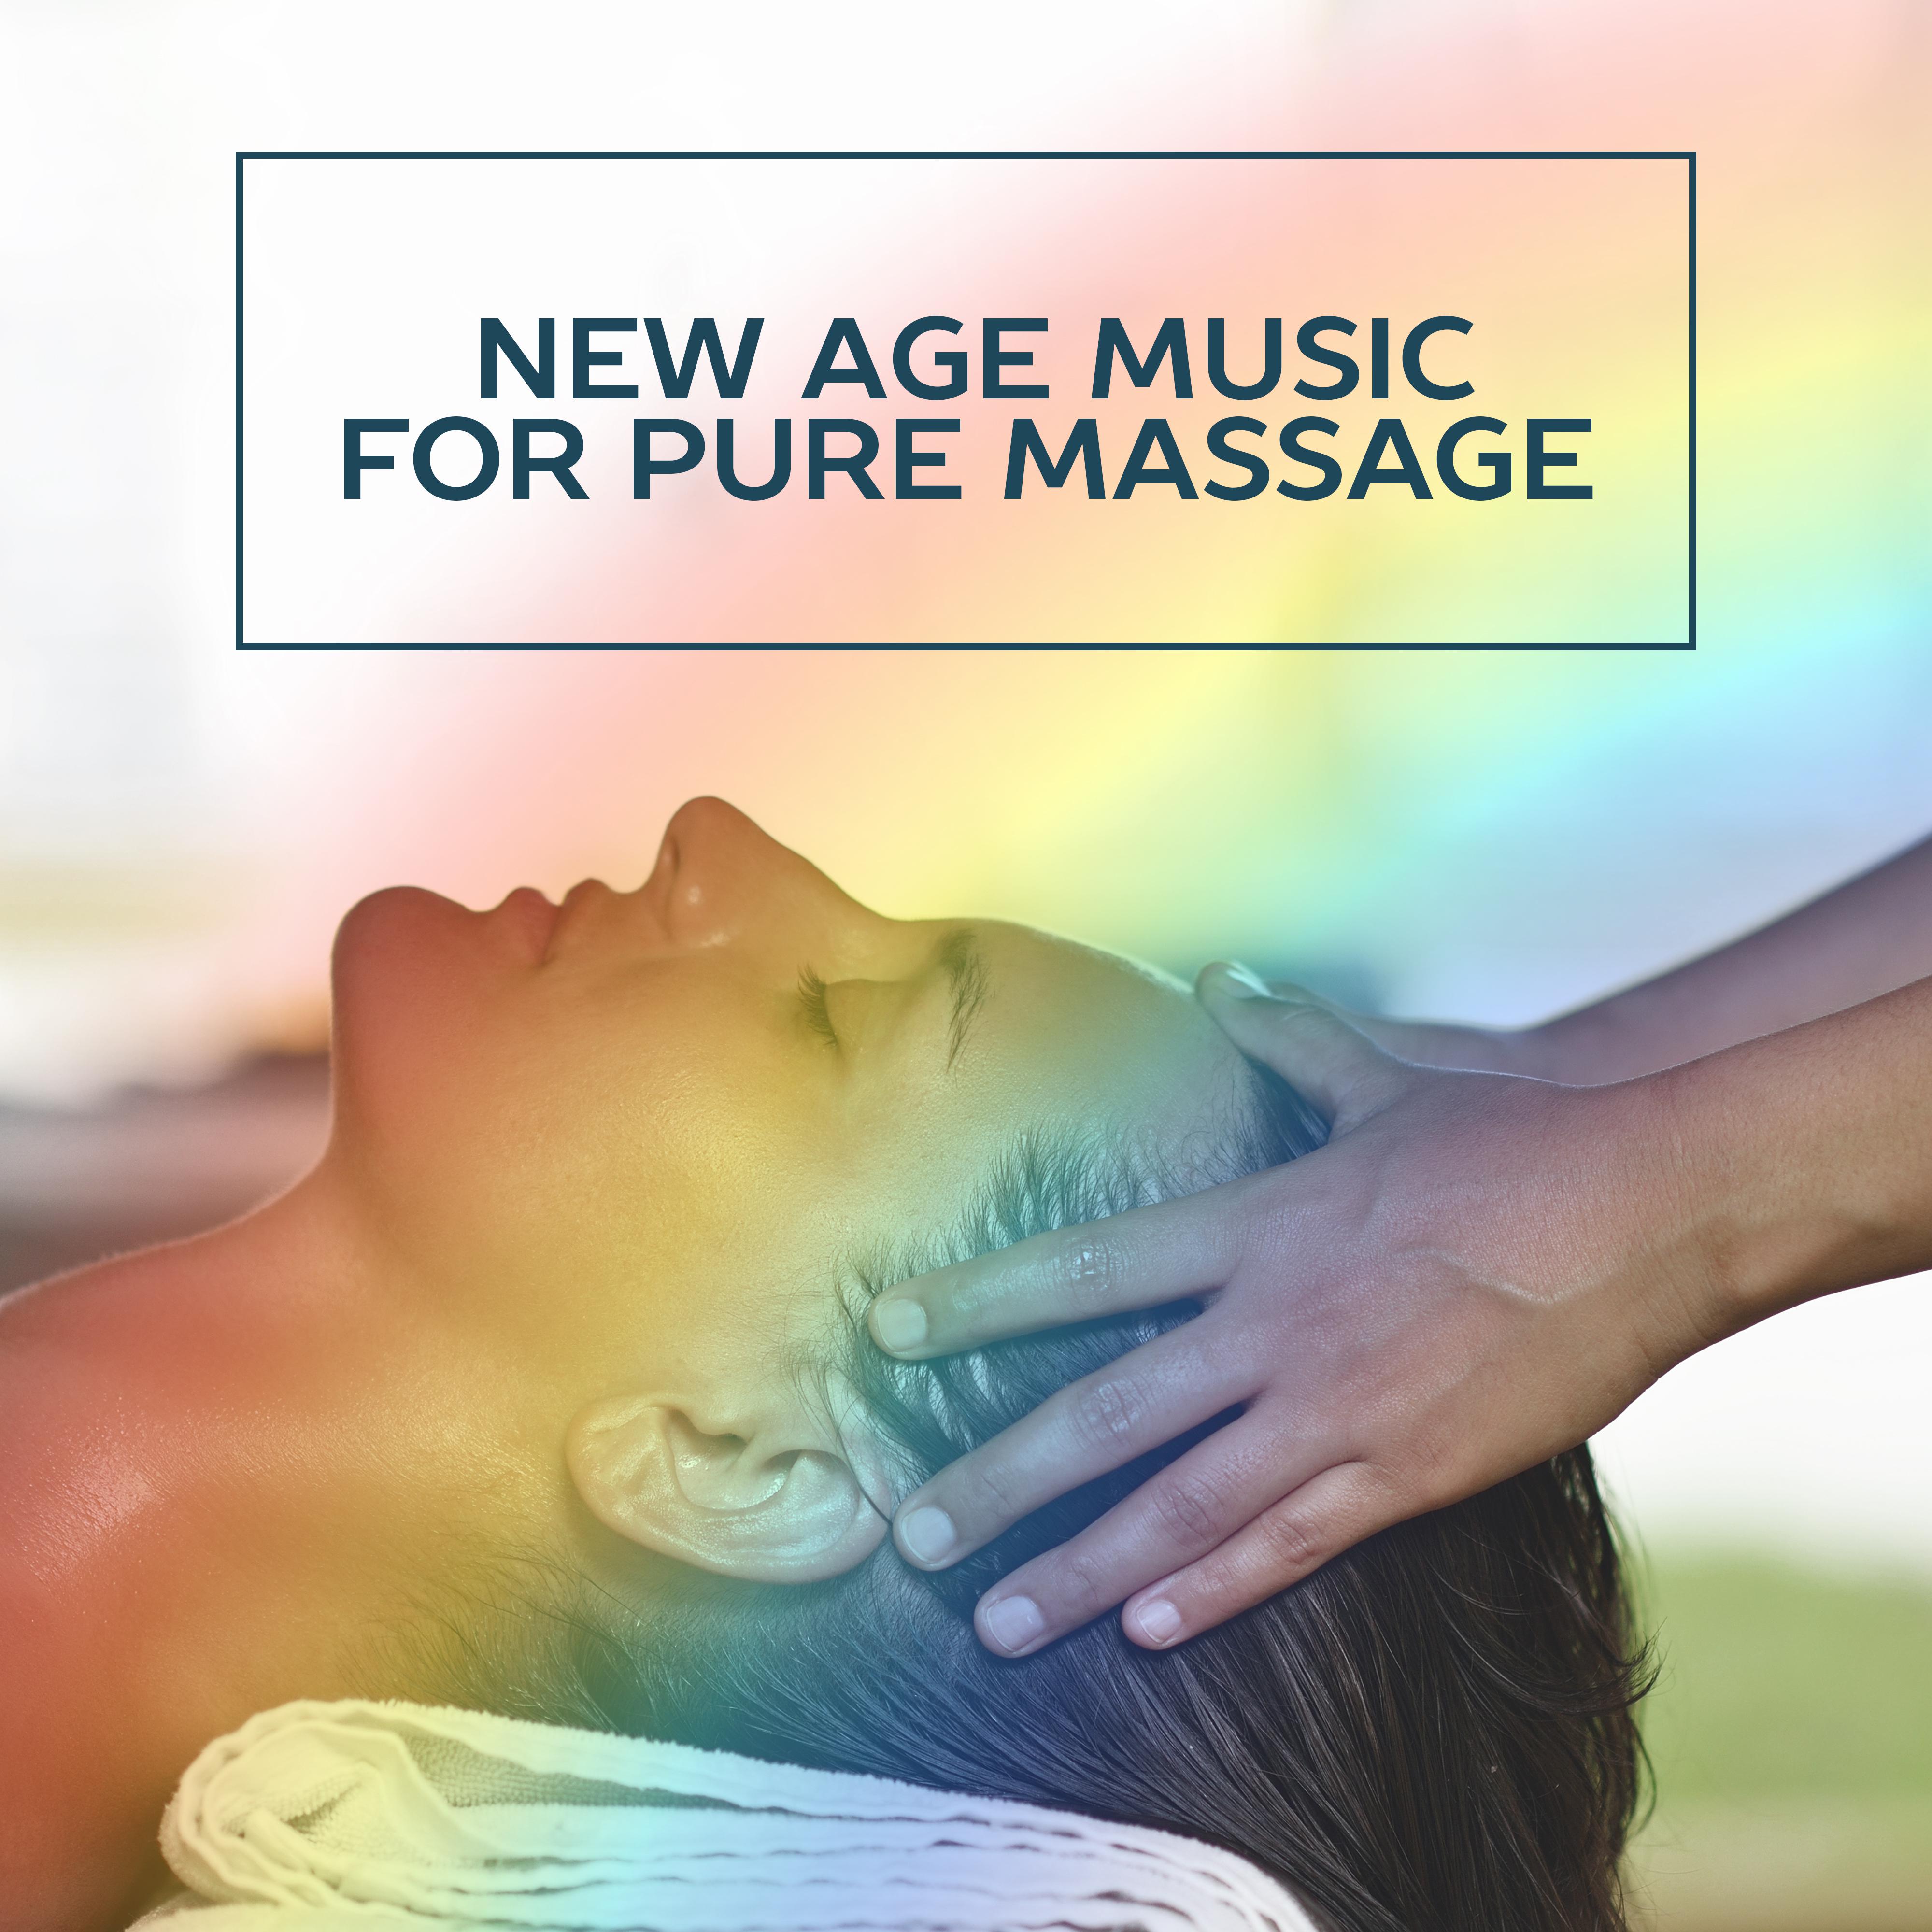 New Age Music for Pure Massage – Nature Sounds to Calm Down, Stress Relief, Healing Spa, Wellness, Relaxing Therapy for Body, Ocean Waves